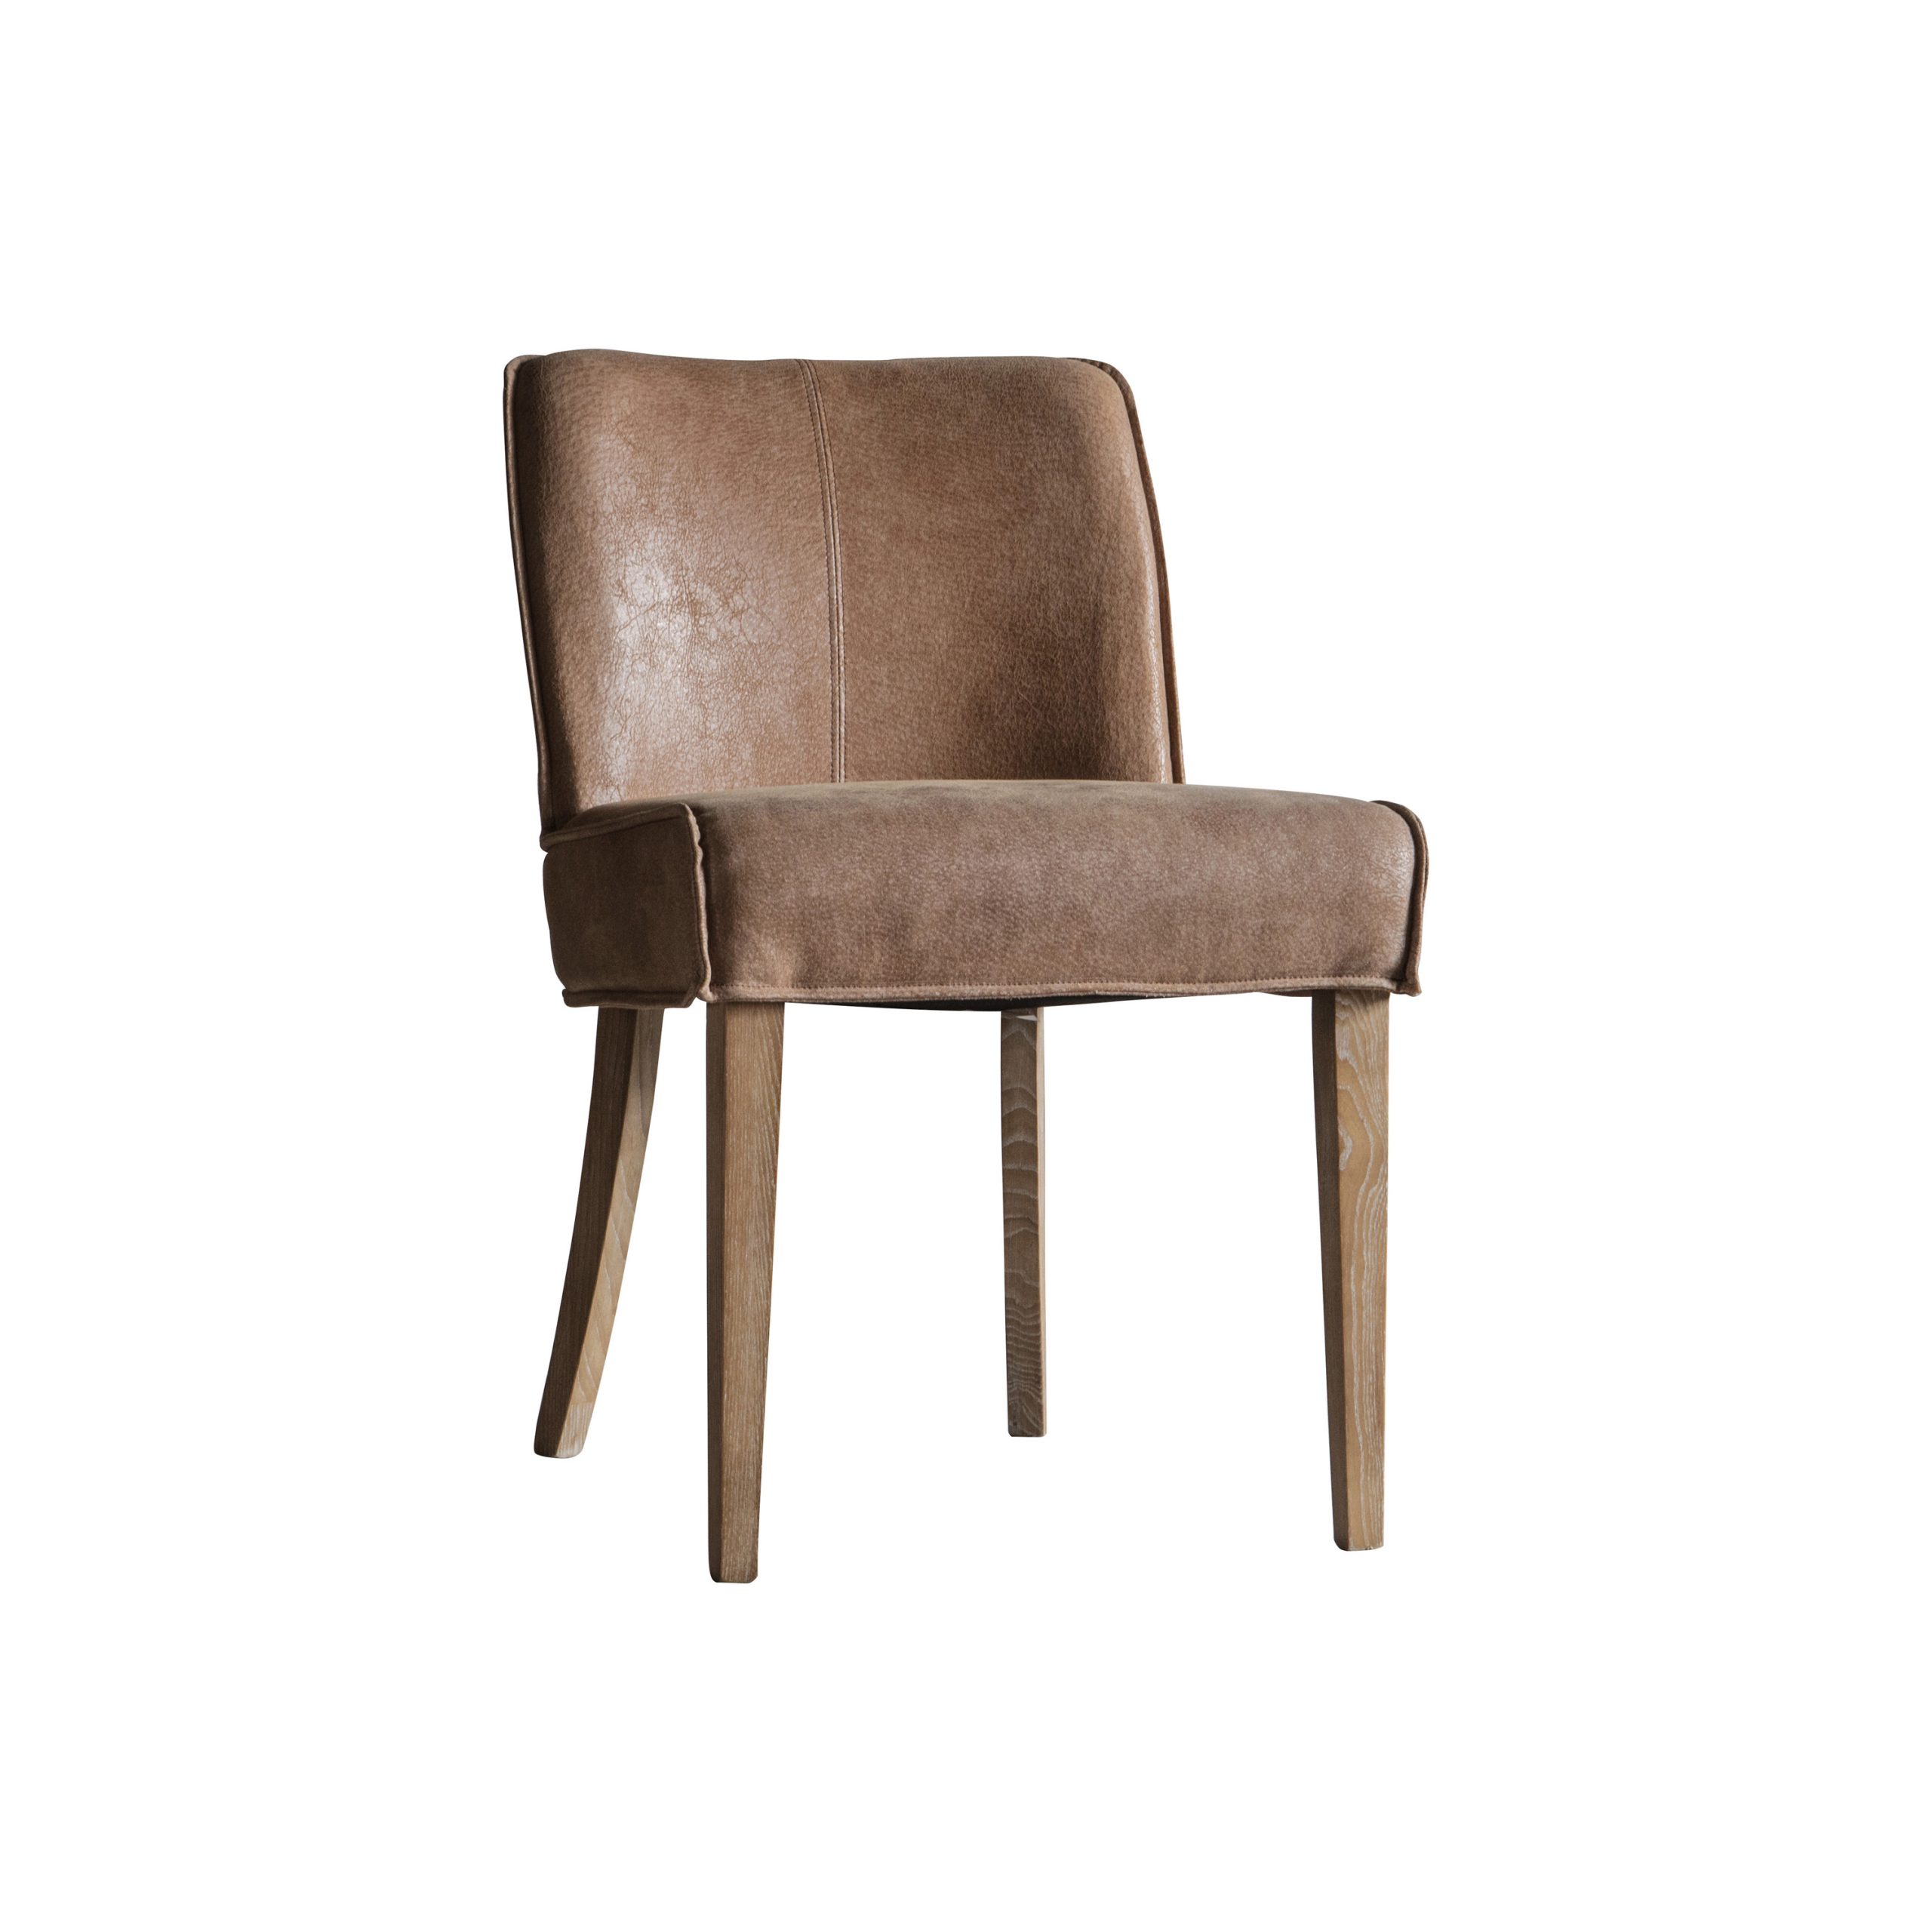 Gallery Direct Tarnby Chair Brown Leather (Set of 2)